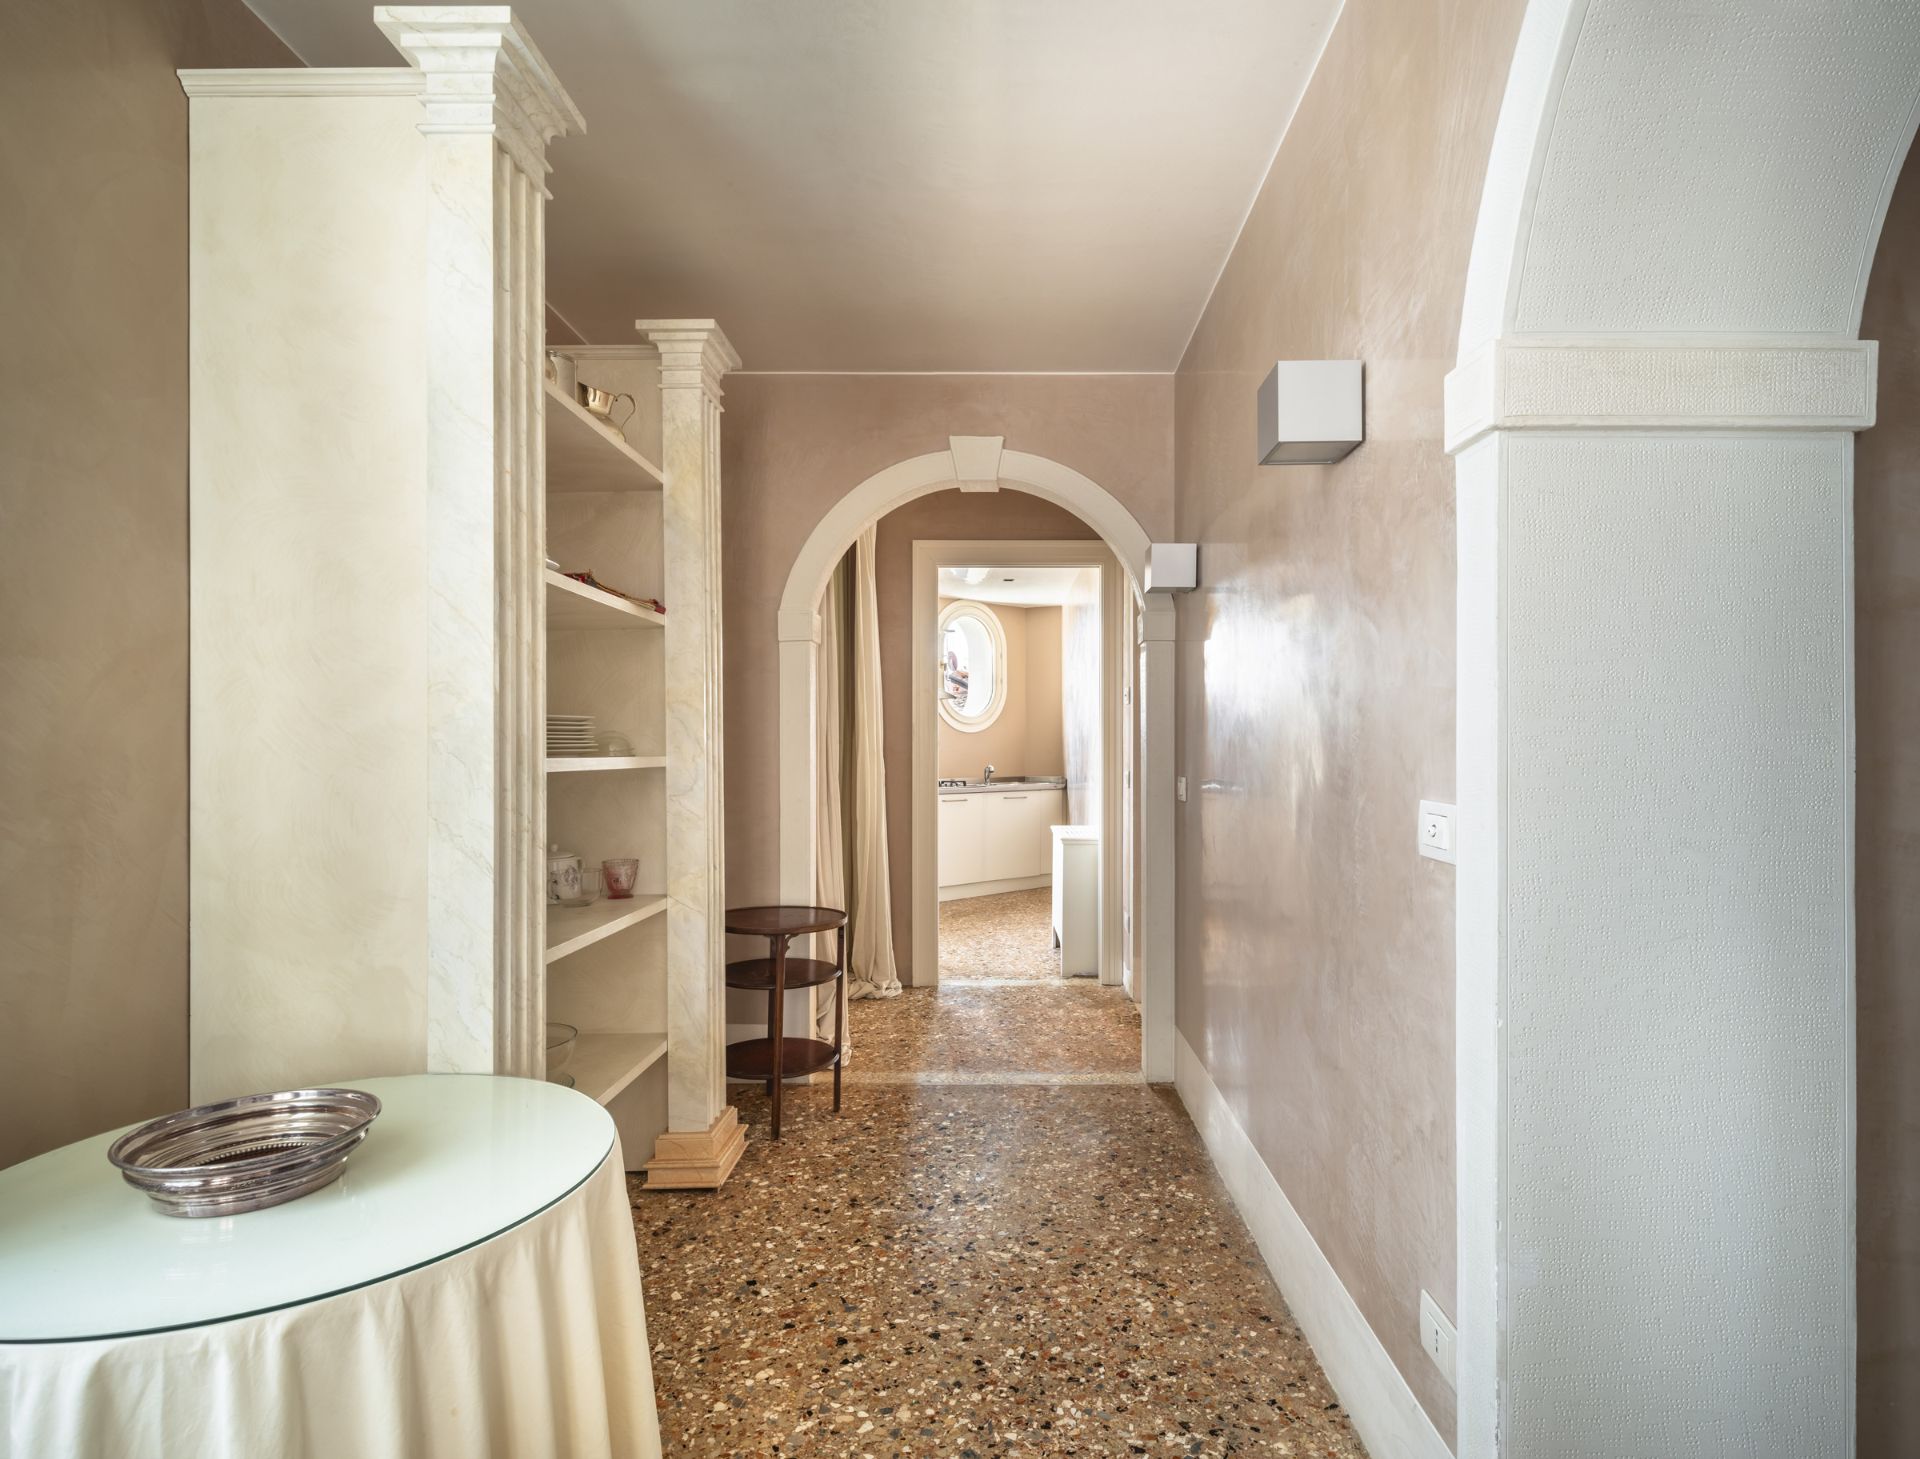 1 bedroom apartment for sale in Venice | Venice Sotheby's International ...